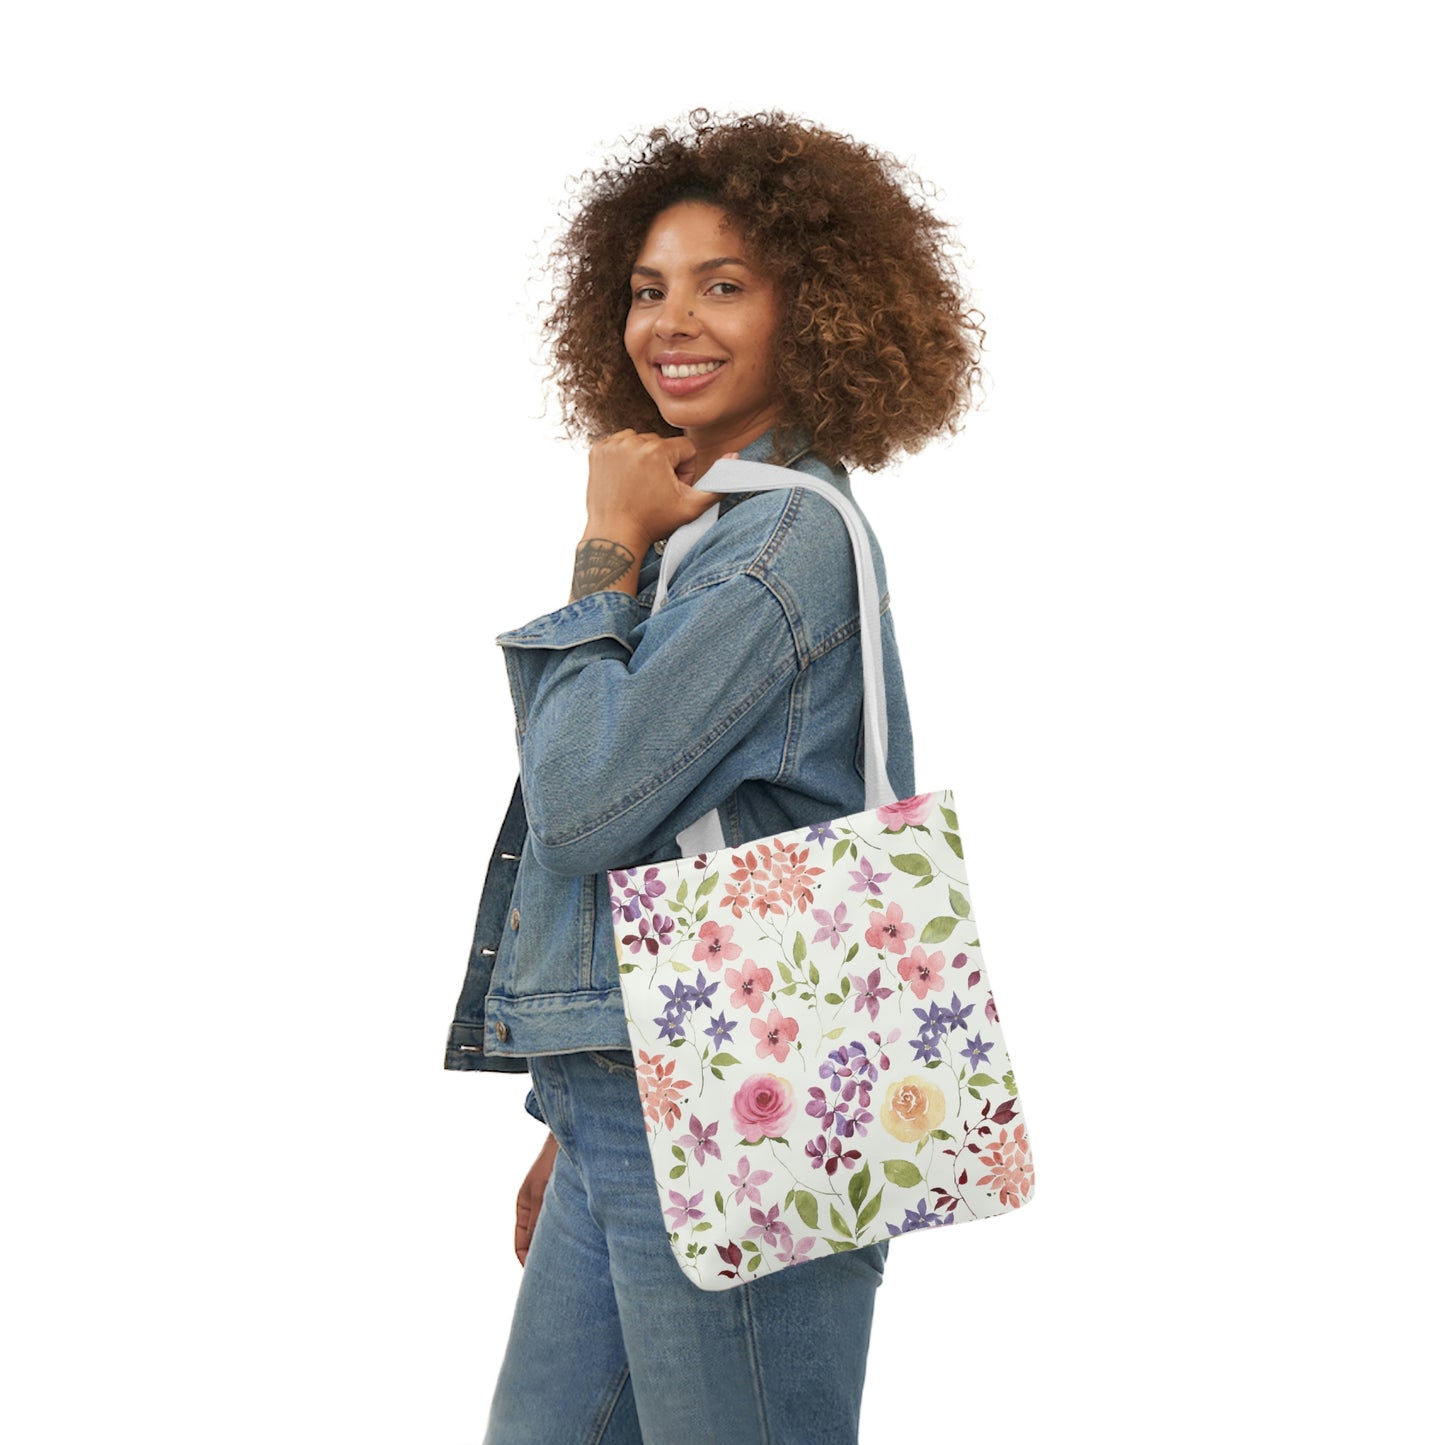 Yellow and Pink Roses Polyester Canvas Tote Bag